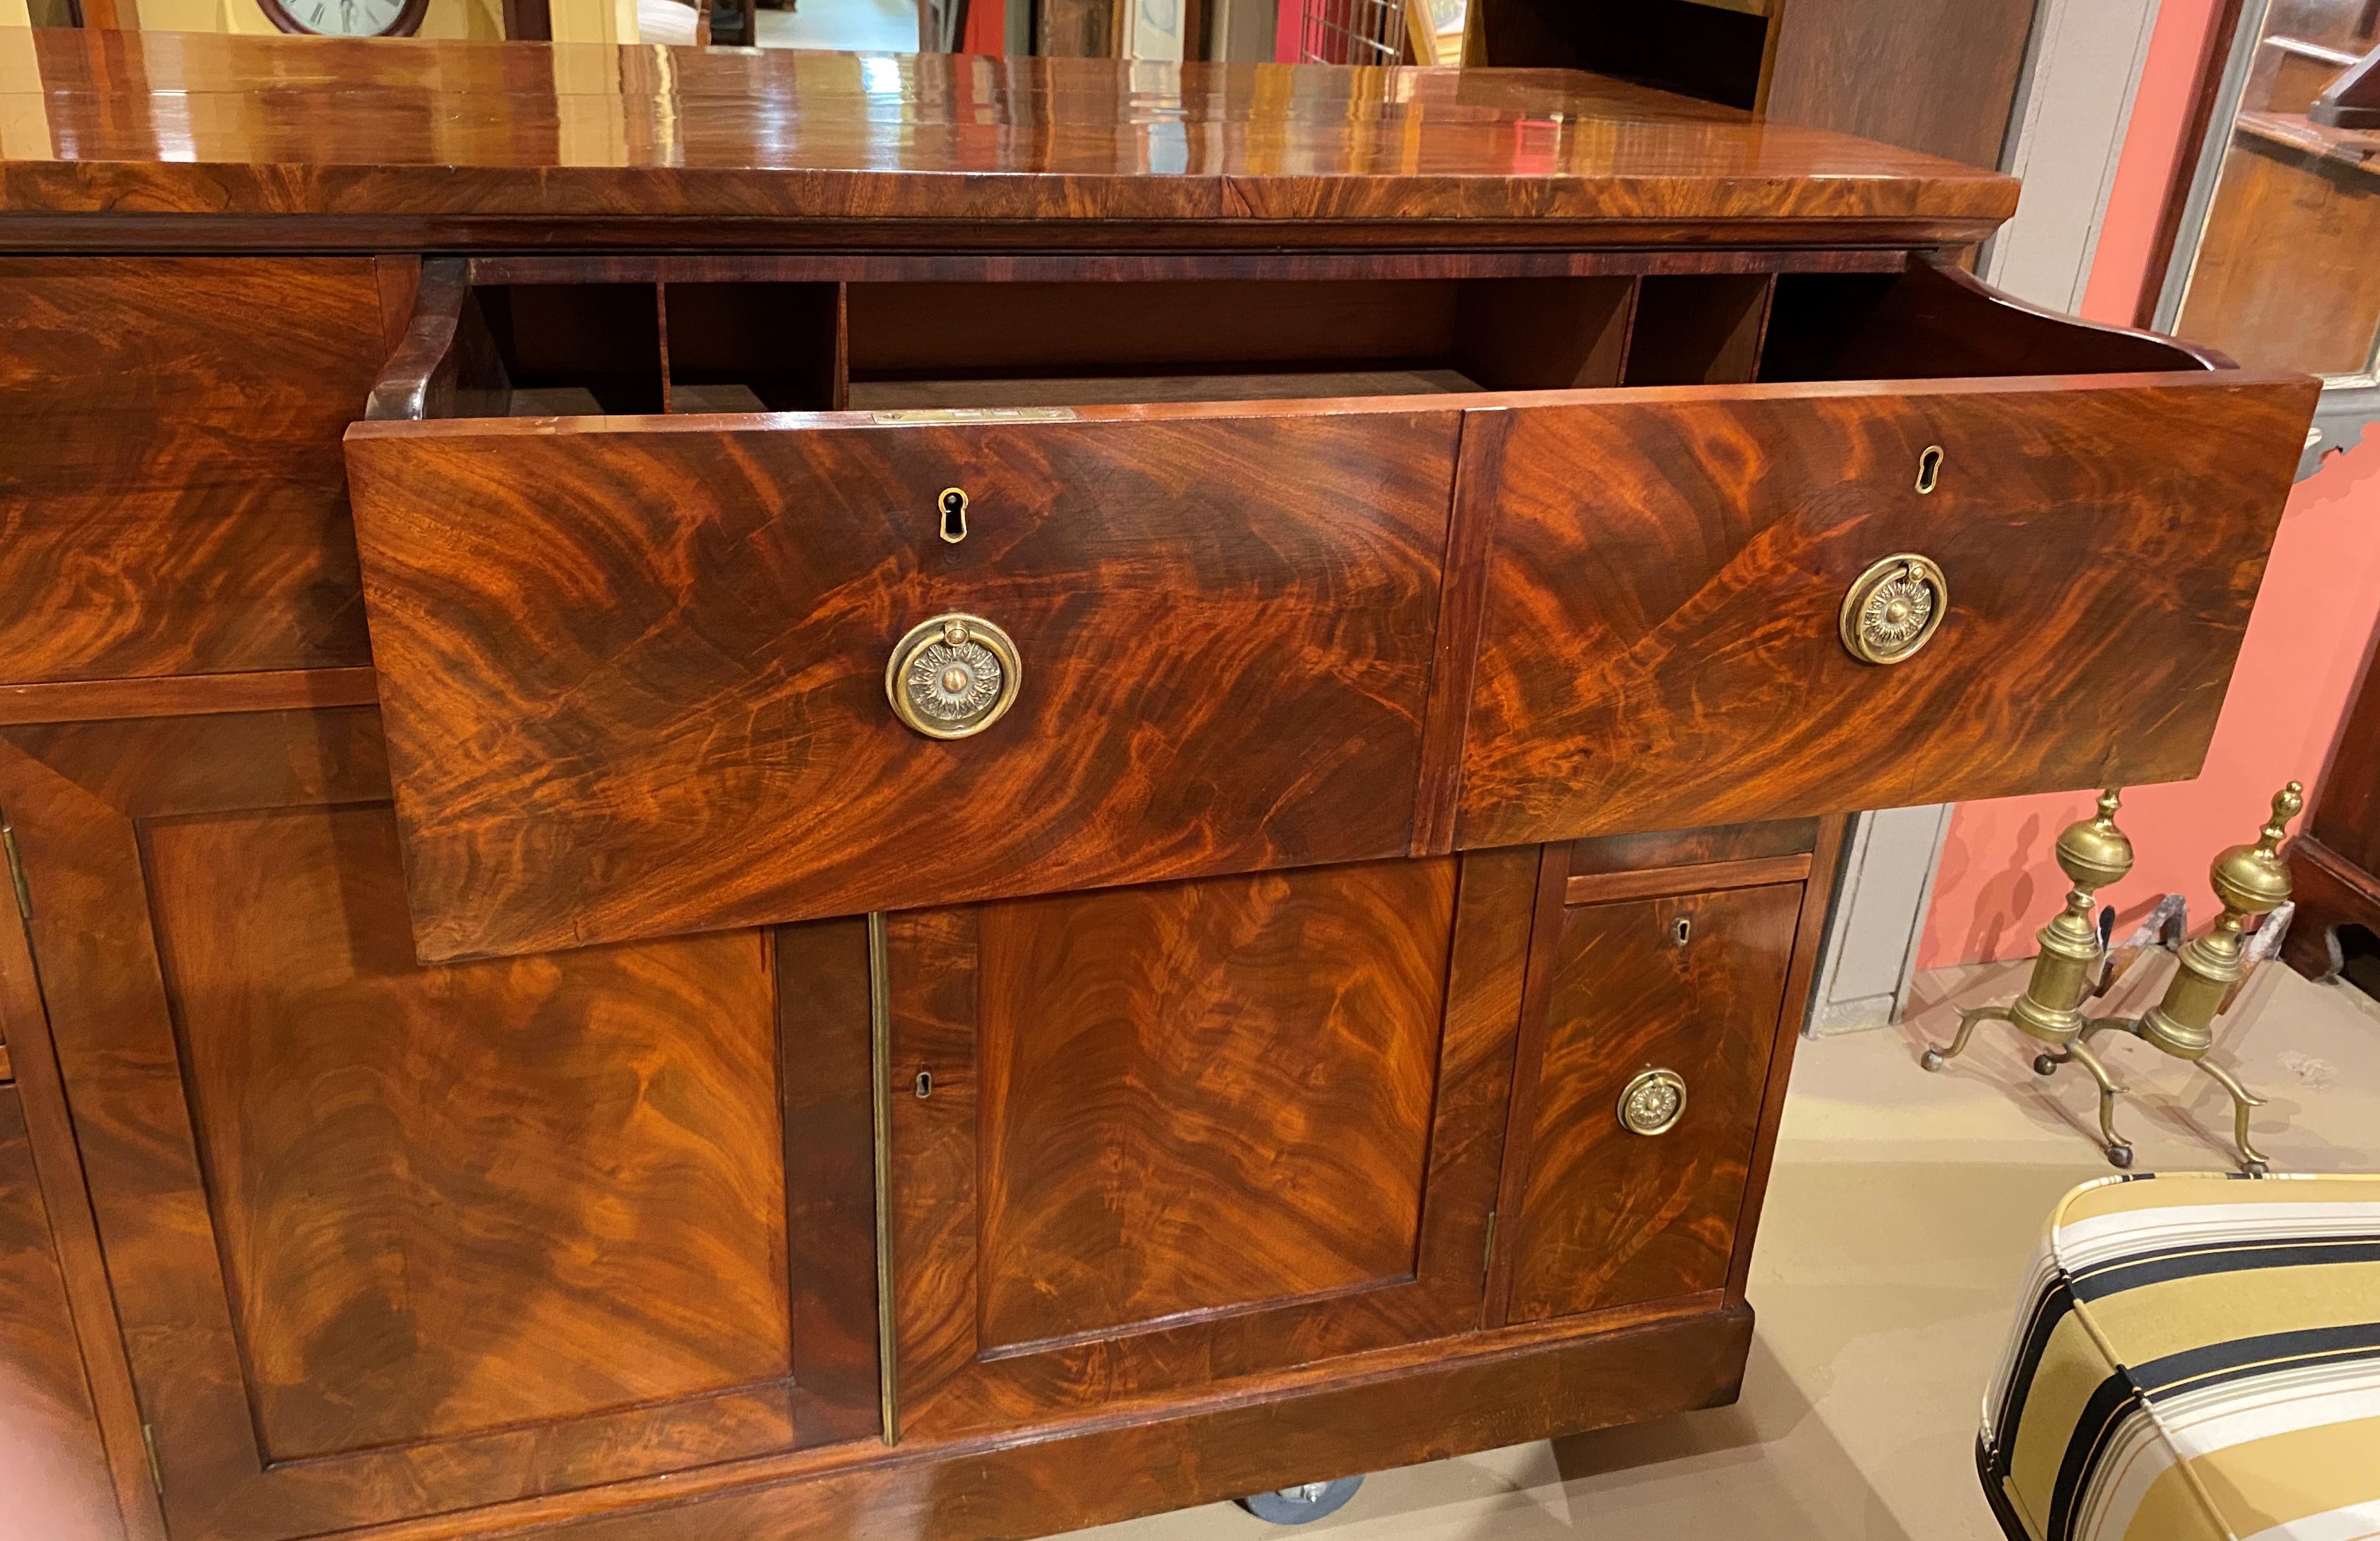 A fine example of a figured mahogany veneered sideboard or server with fitted hidden butler’s desk with drop down leather writing surface and compartmentalized interior, surmounting two paneled doors, opening to interior shelved storage